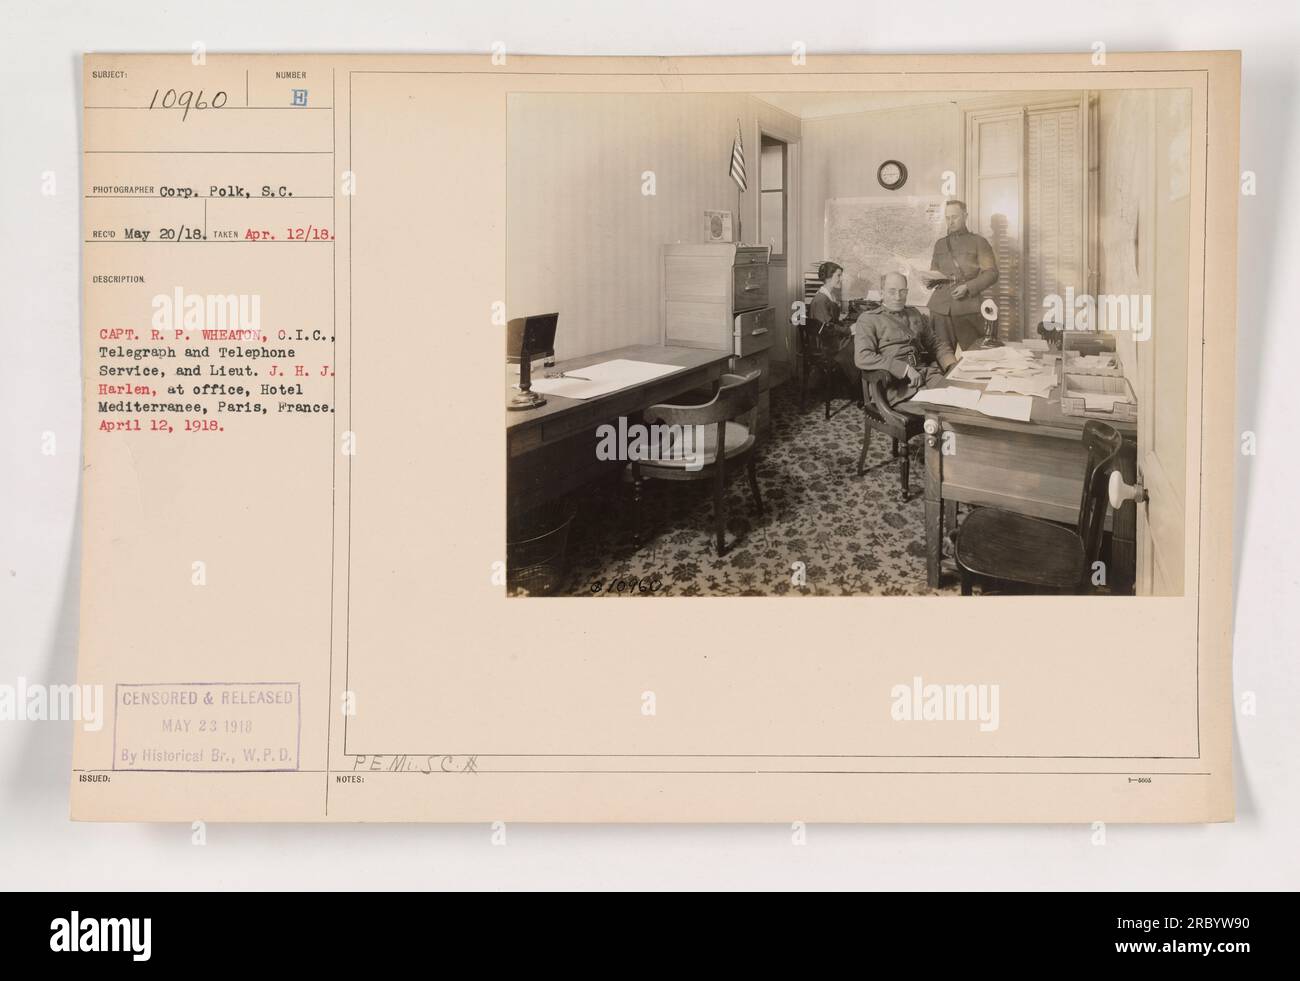 Captain R.P. Wheaton, O.I.C., and Lieutenant J.H.J. Harlen are seen in their office at Hotel Mediterranee in Paris, France. The photo was taken on April 12, 1918, by Corp. Polk and released by the Historical Branch on May 23, 1918. The caption identifies the officers and their role in the Telegraph and Telephone Service. Stock Photo